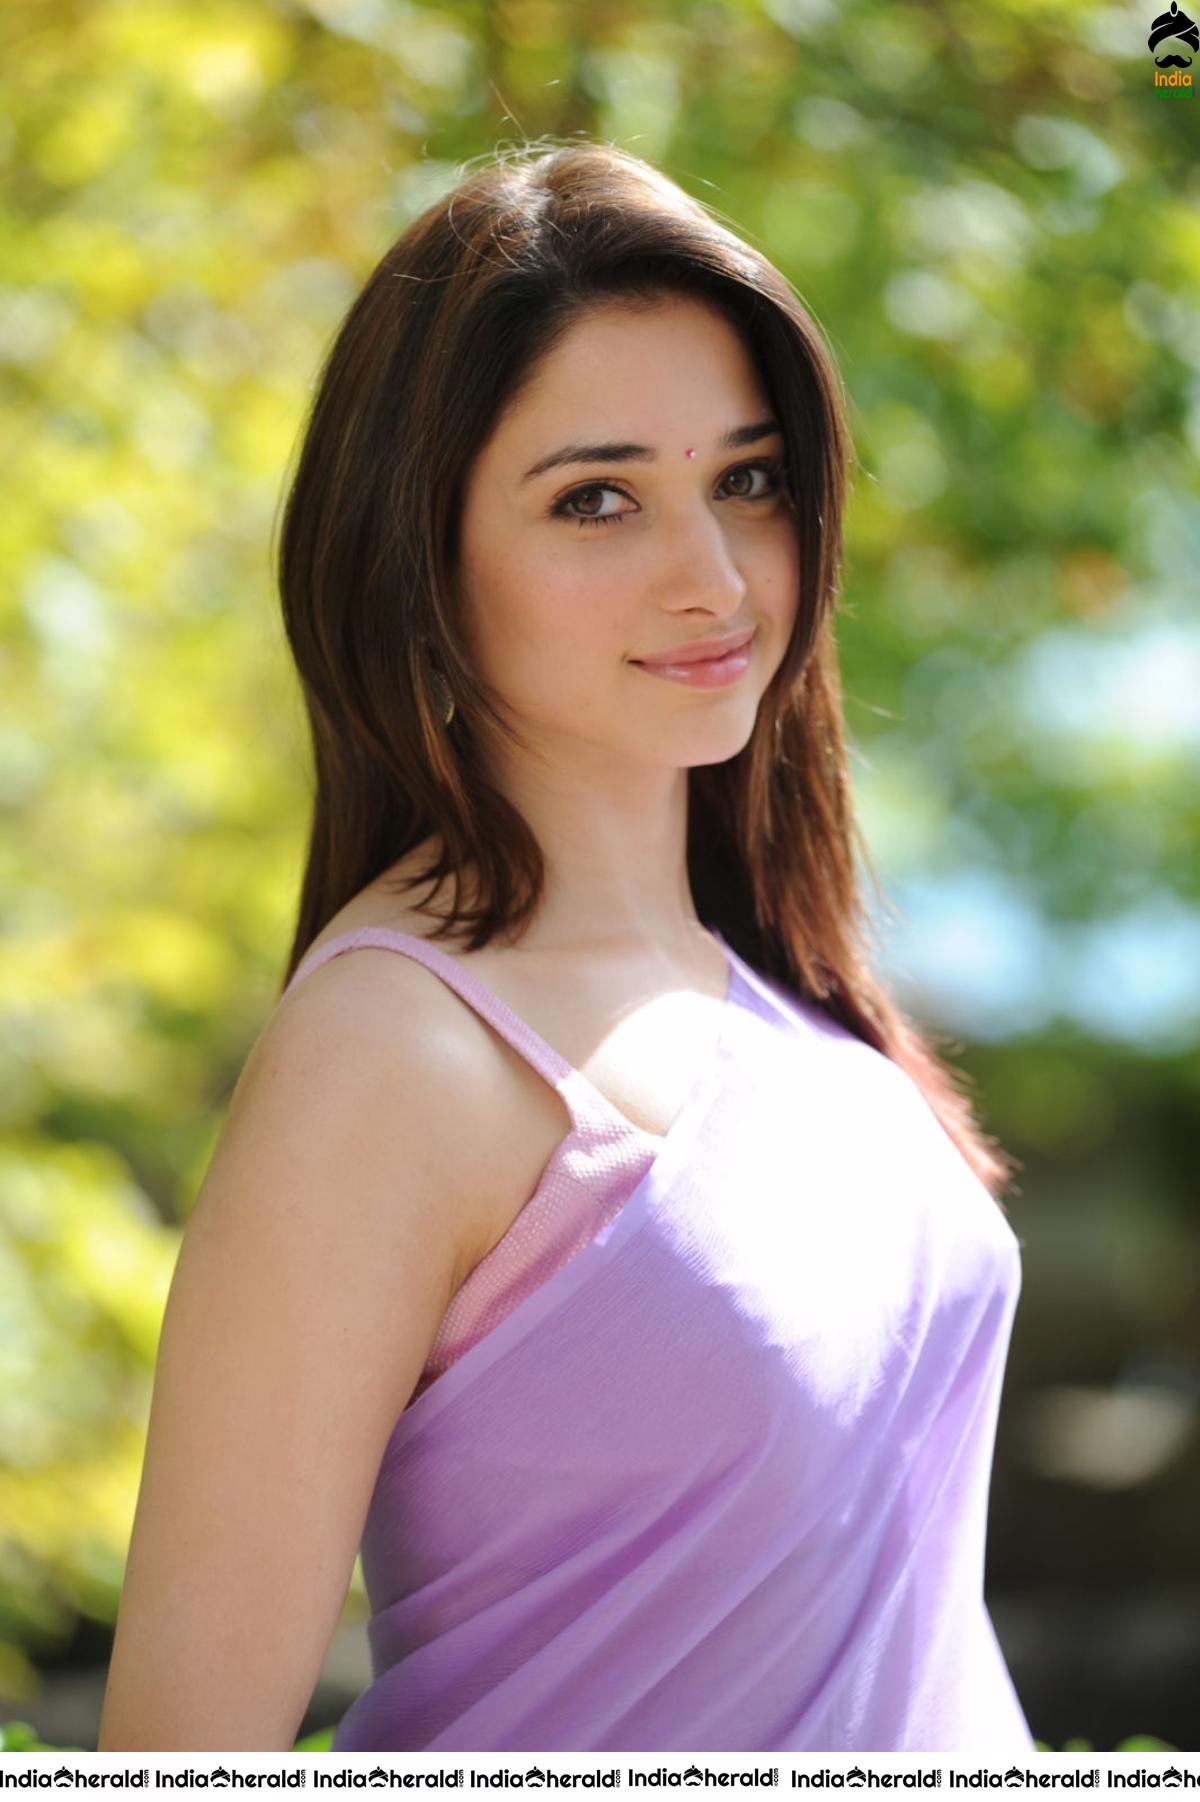 Tamanna Hot In Sleeveless Blouse And Light Colored Saree Set 2